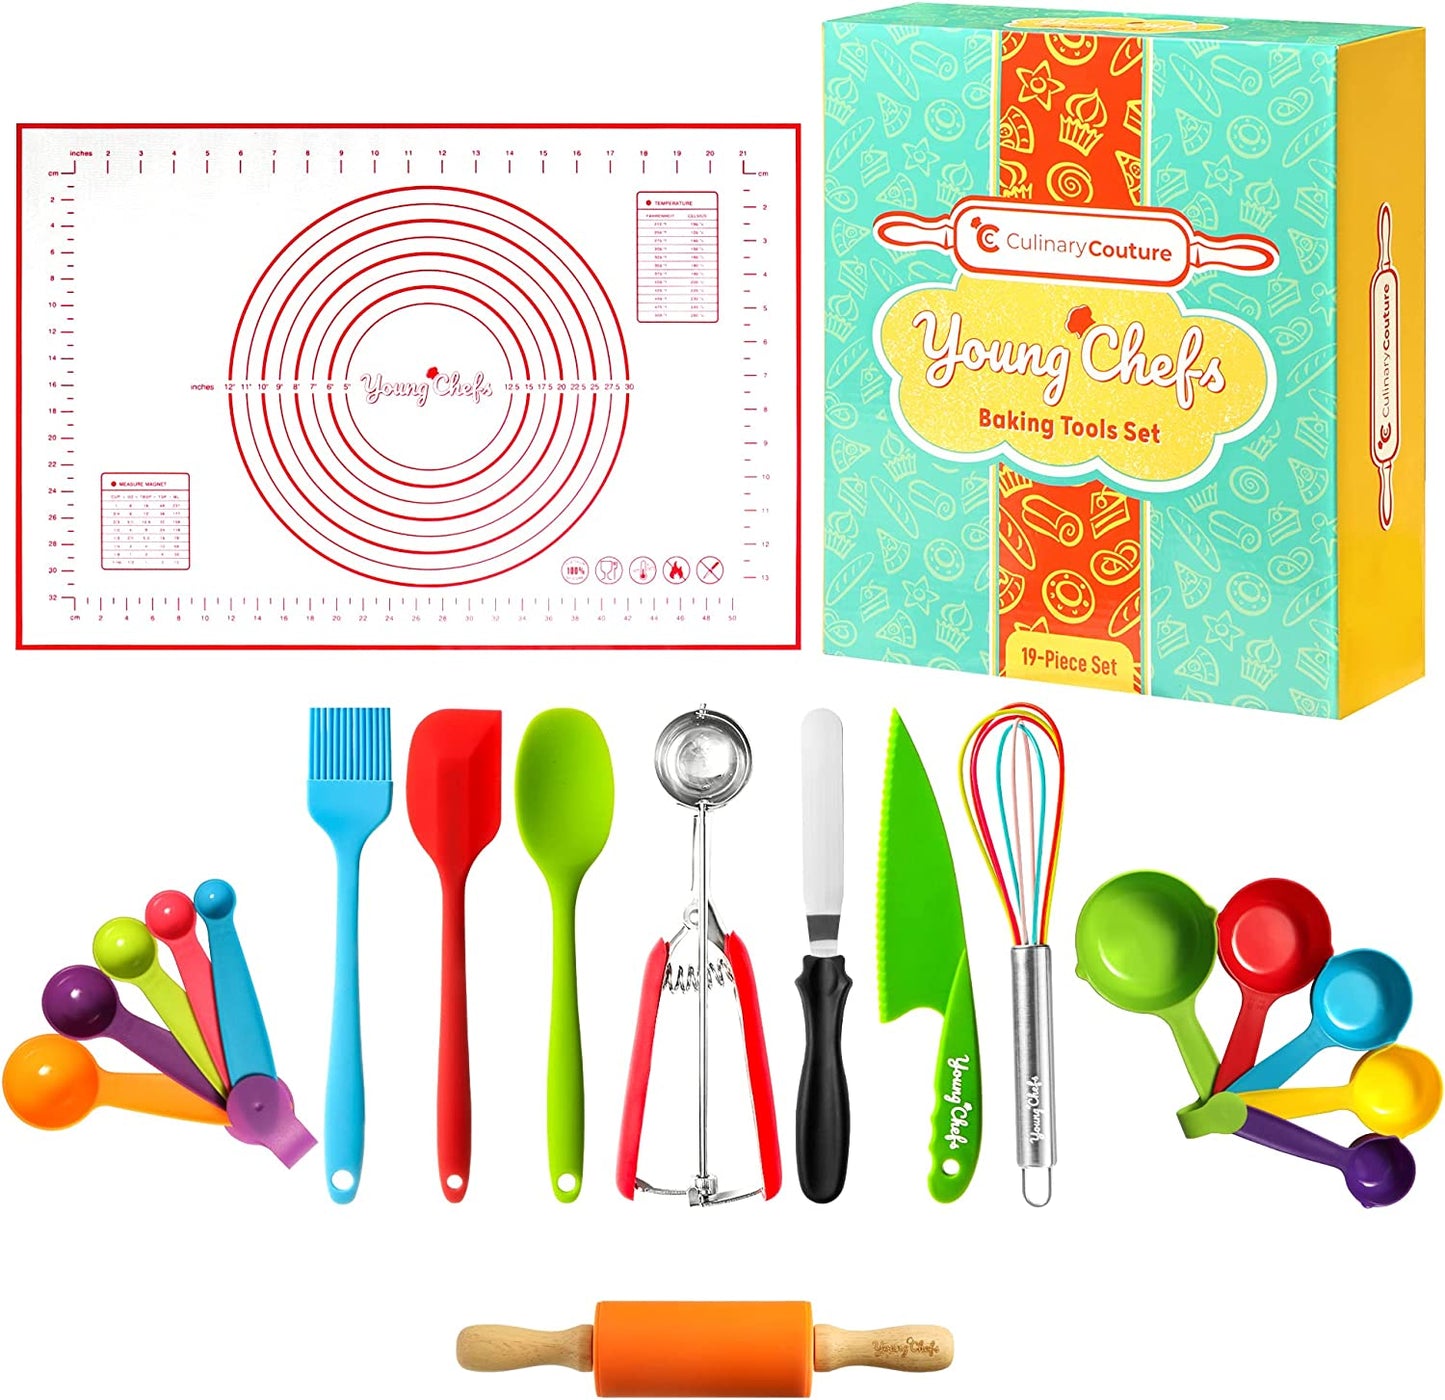 Young Chefs Baking Tool Set